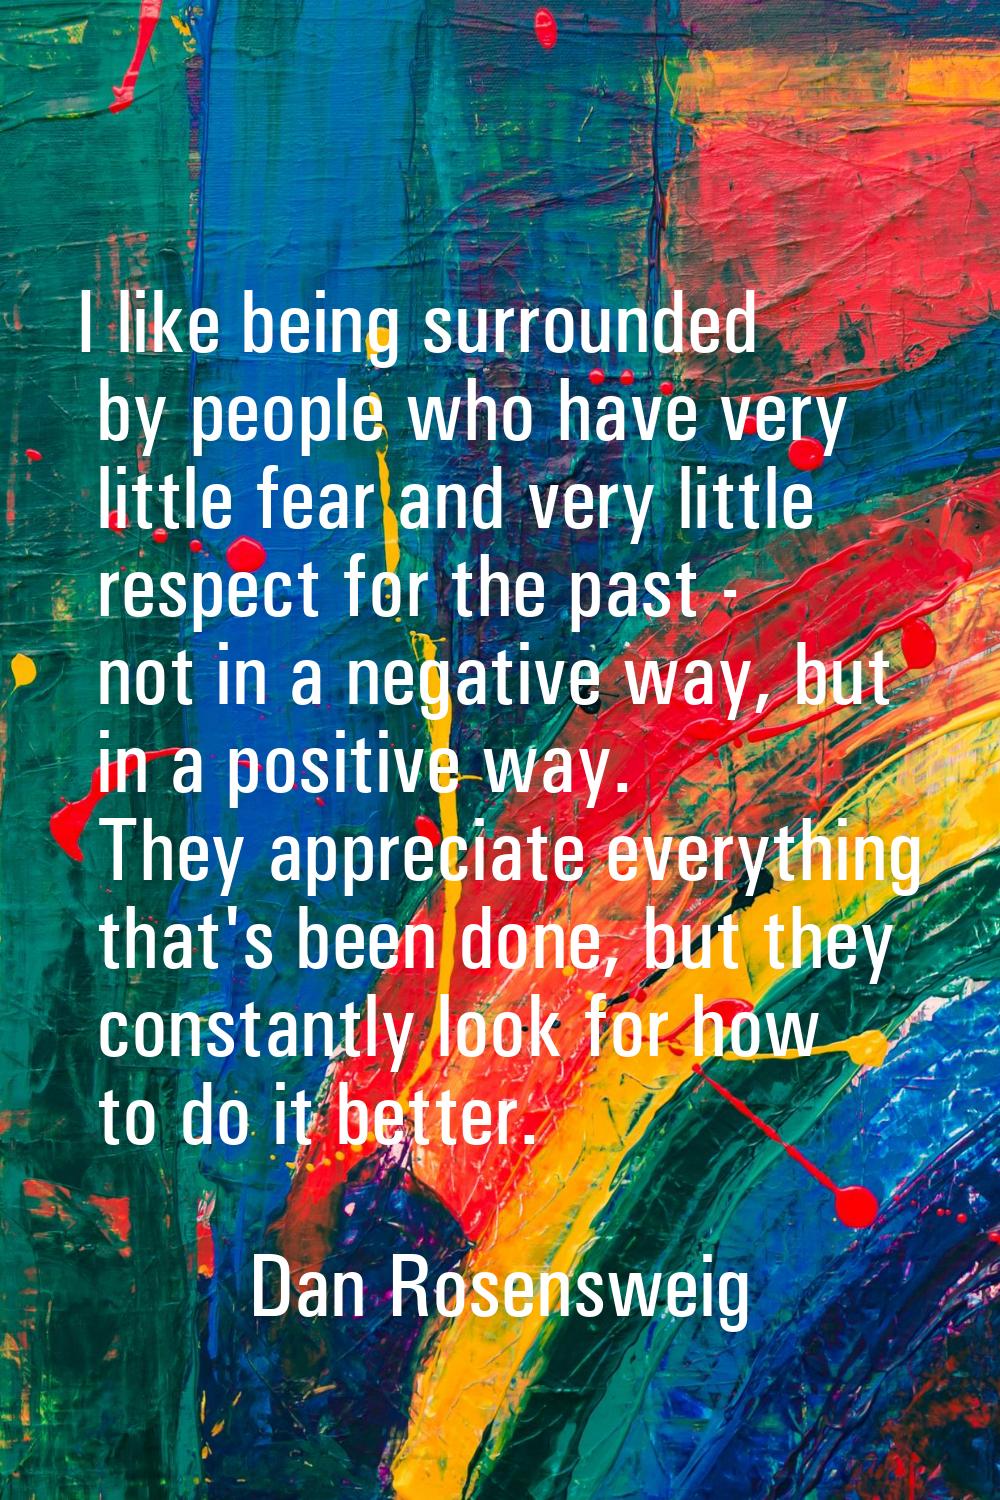 I like being surrounded by people who have very little fear and very little respect for the past - 